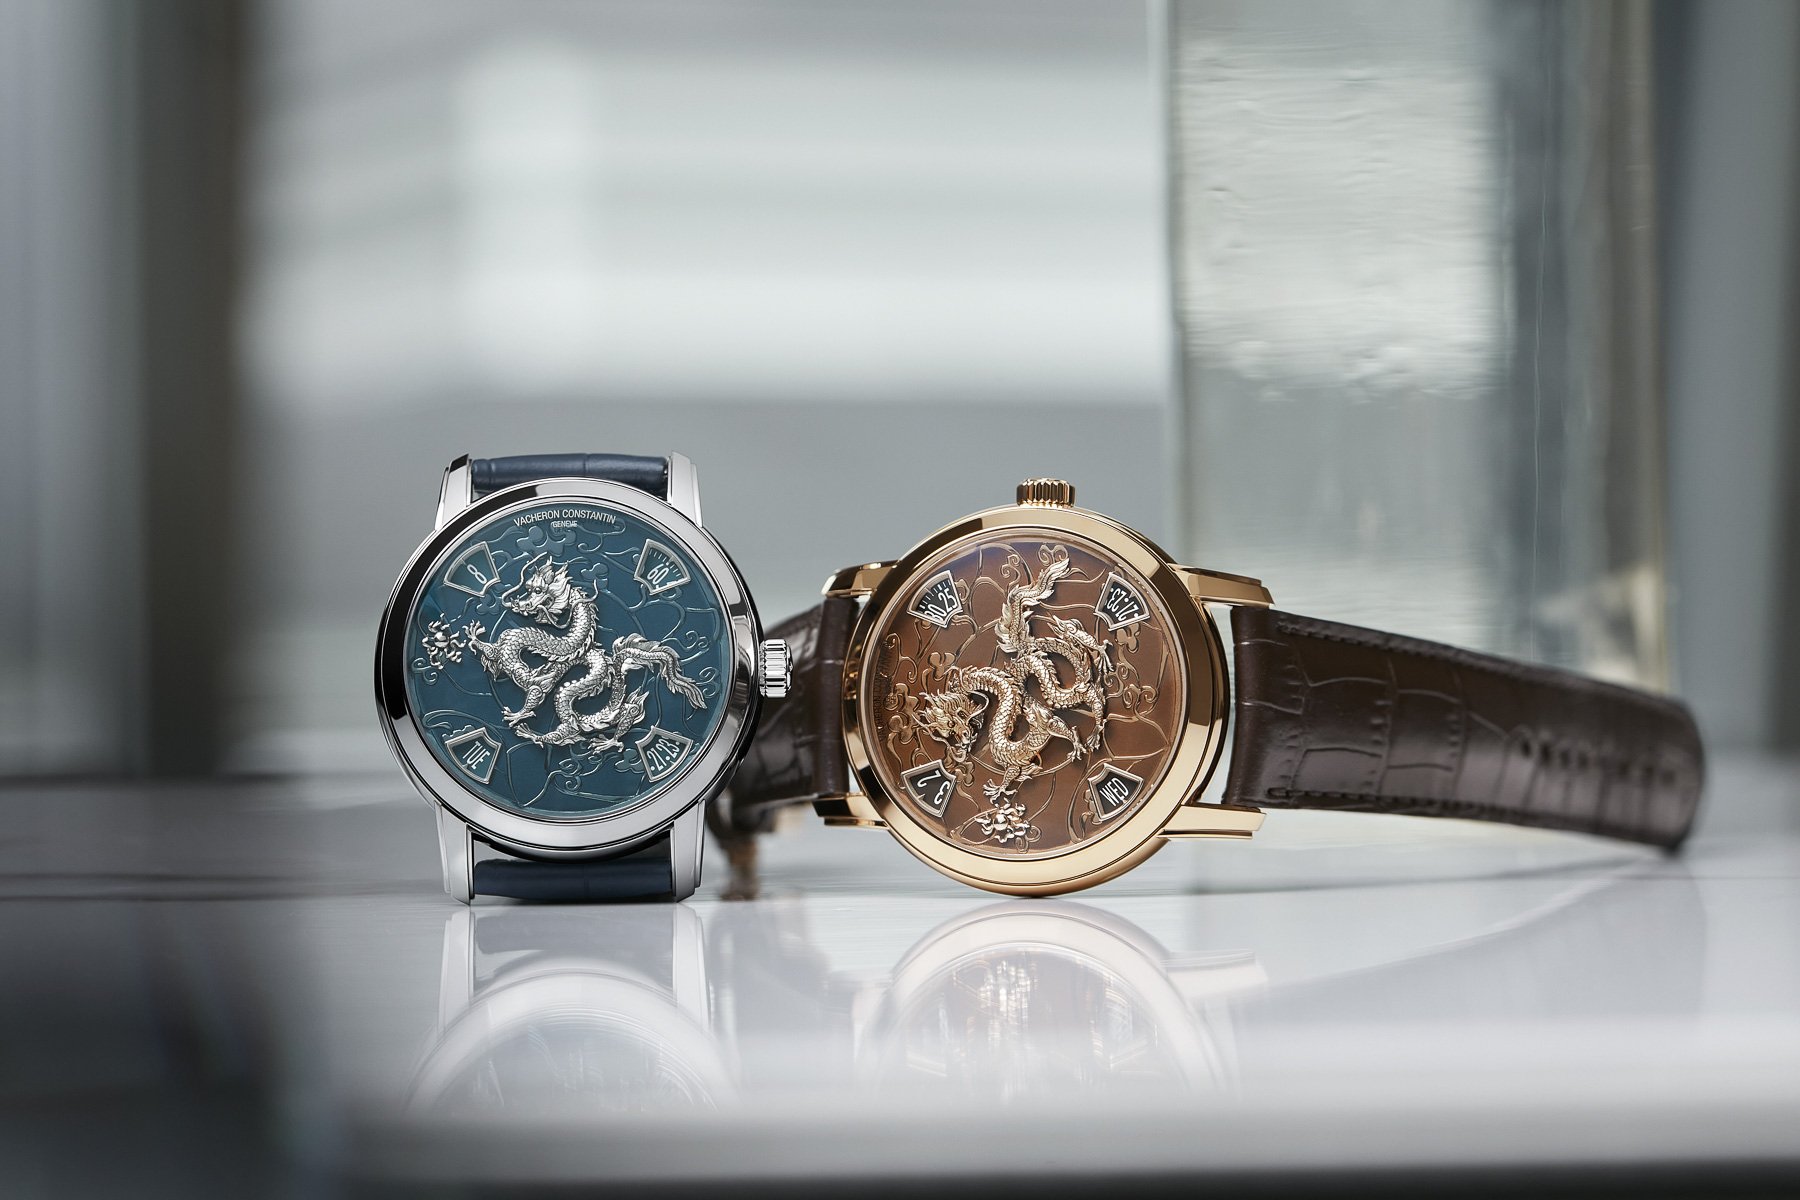 Vacheron Constantin Métiers d'Art The Legend of the Chinese Zodiac – Year of the Dragon